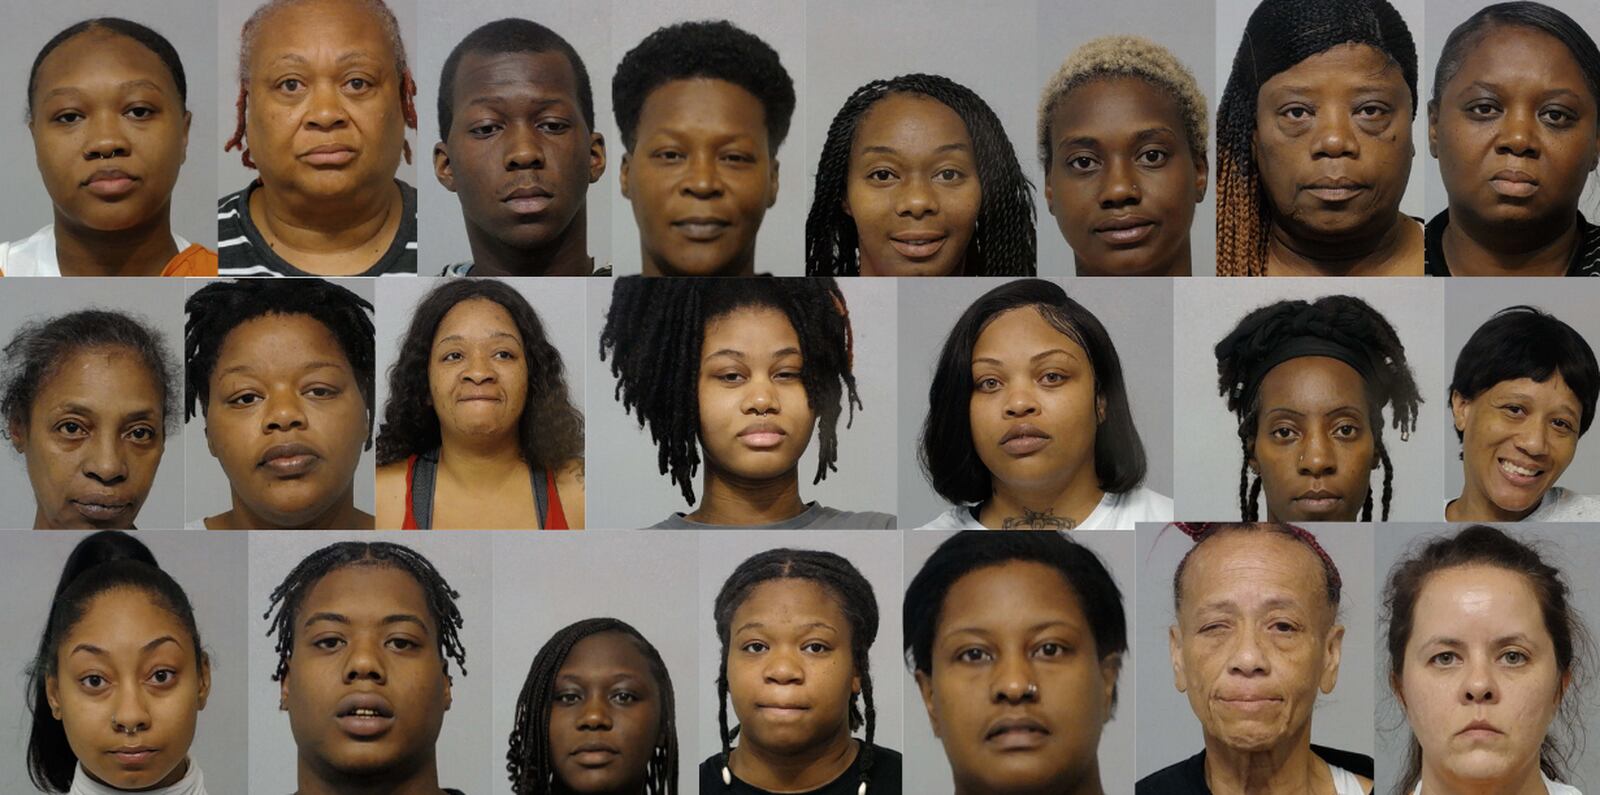 More than 20 people accused of stealing money by filing false